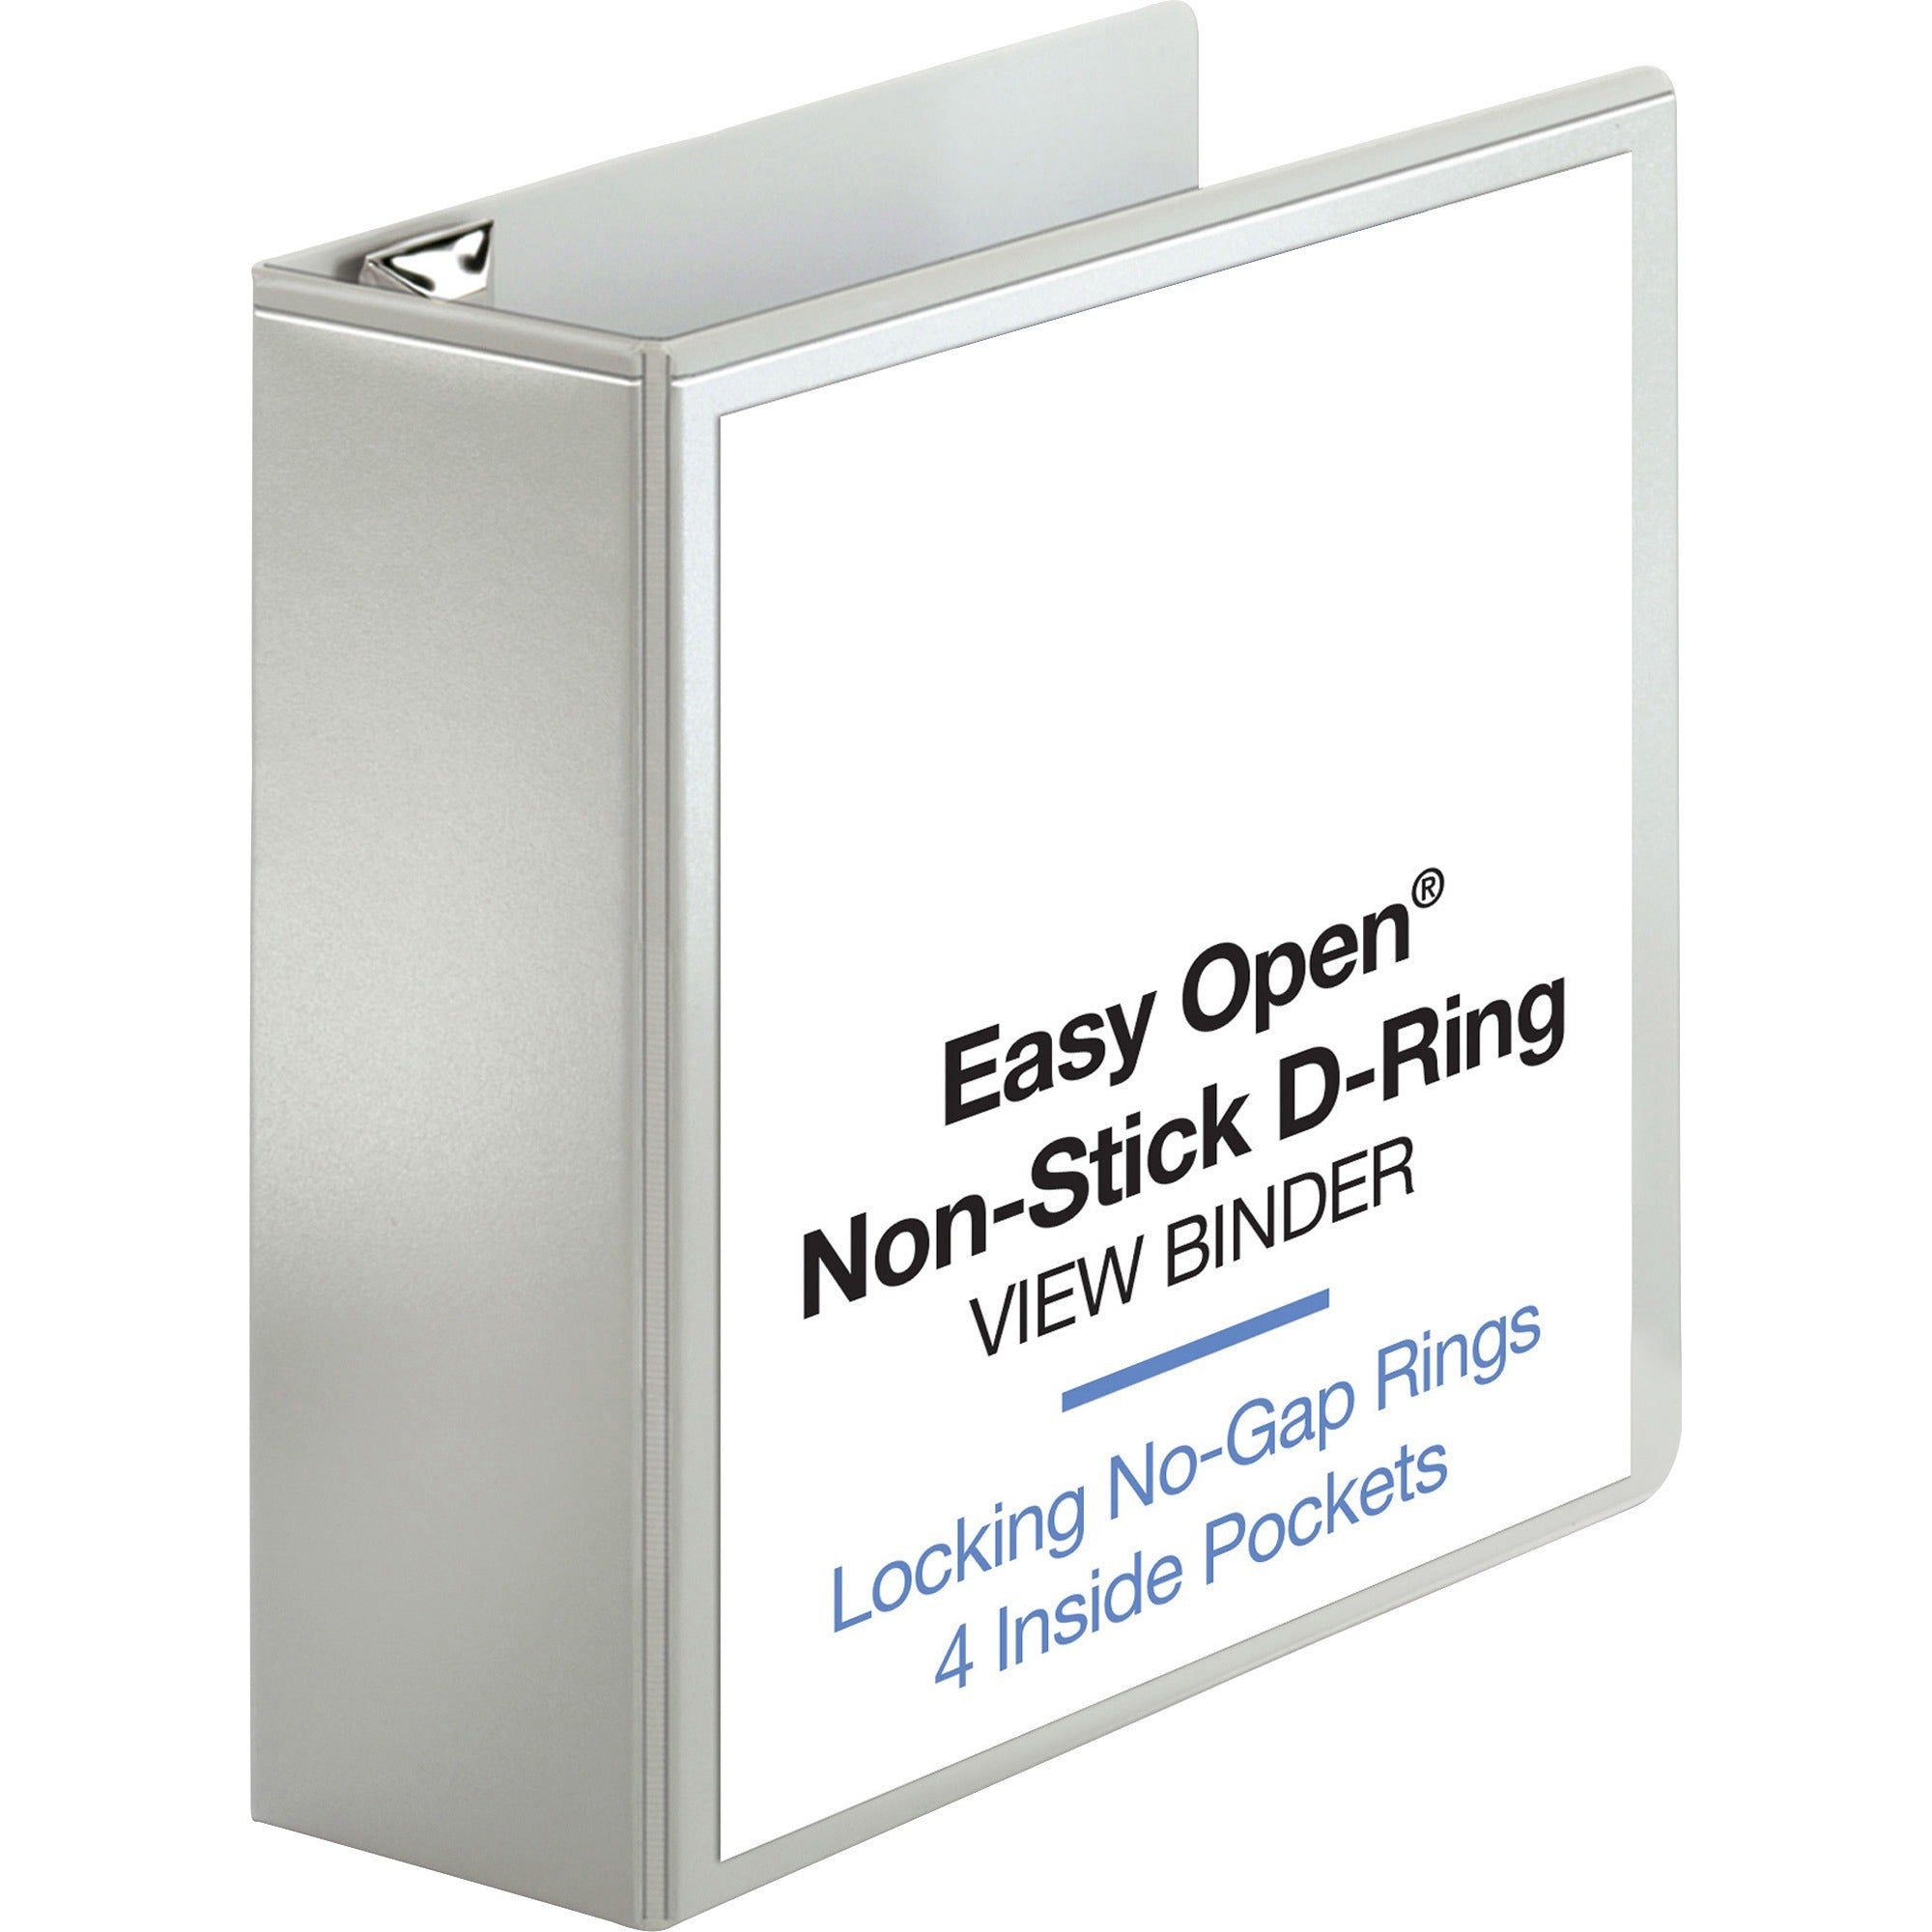 business-source-locking-d-ring-view-binder-4-binder-capacity-letter-8-1-2-x-11-sheet-size-775-sheet-capacity-d-ring-fasteners-4-inside-front-&-back-pockets-polypropylene-chipboard-white-recycled-acid-free-non-glare-clear_bsn26963 - 1